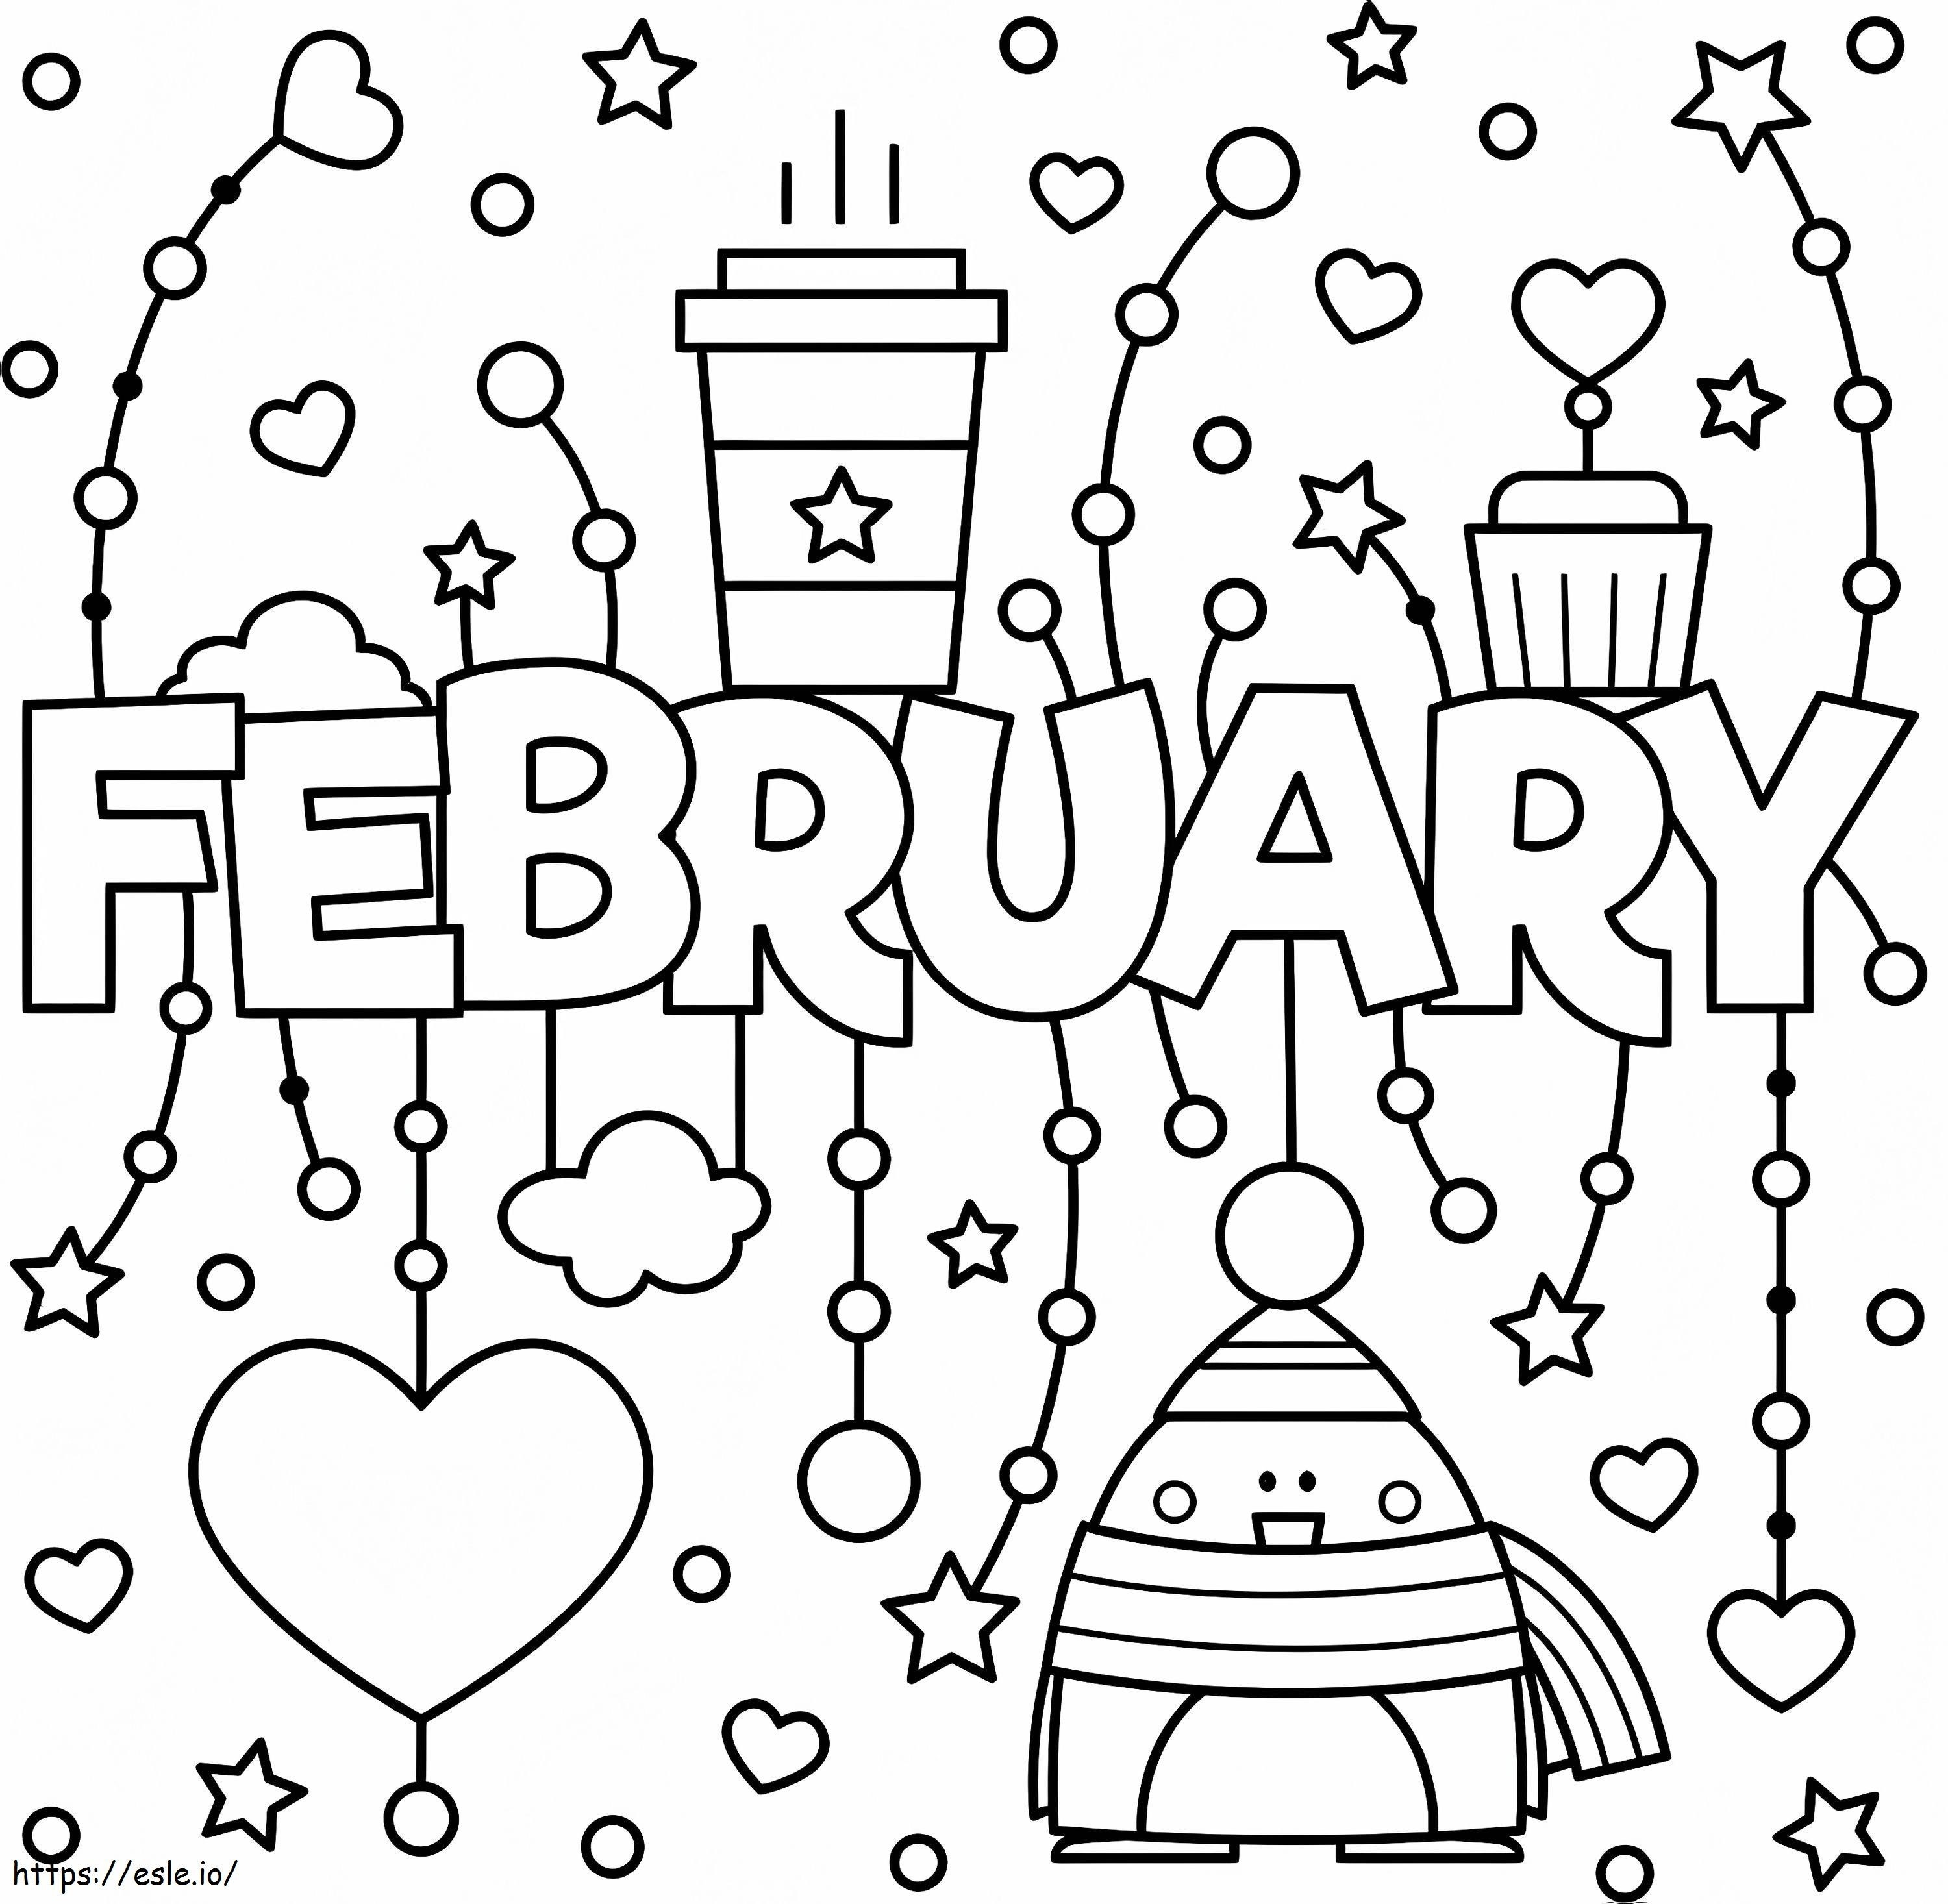 February Coloring Page 2 coloring page